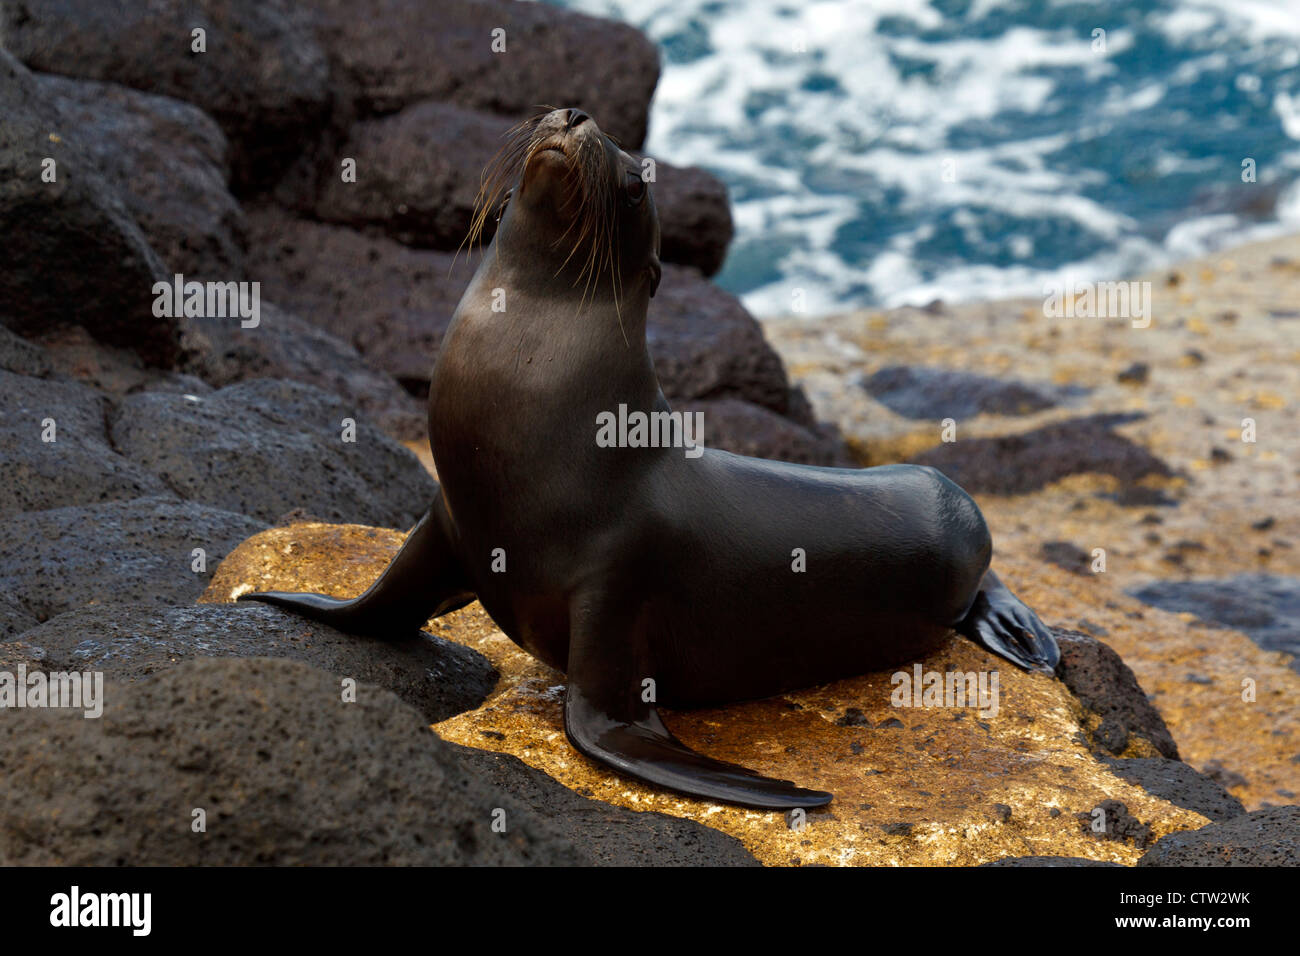 A juvenile Galapagos Sea Lion (Zalphus wollebacki) stands upon a boat landing with lava rocks and ocean in the background, Galapagos Islands National Park, North Seymour Island, Galapagos Ecuador. Stock Photo